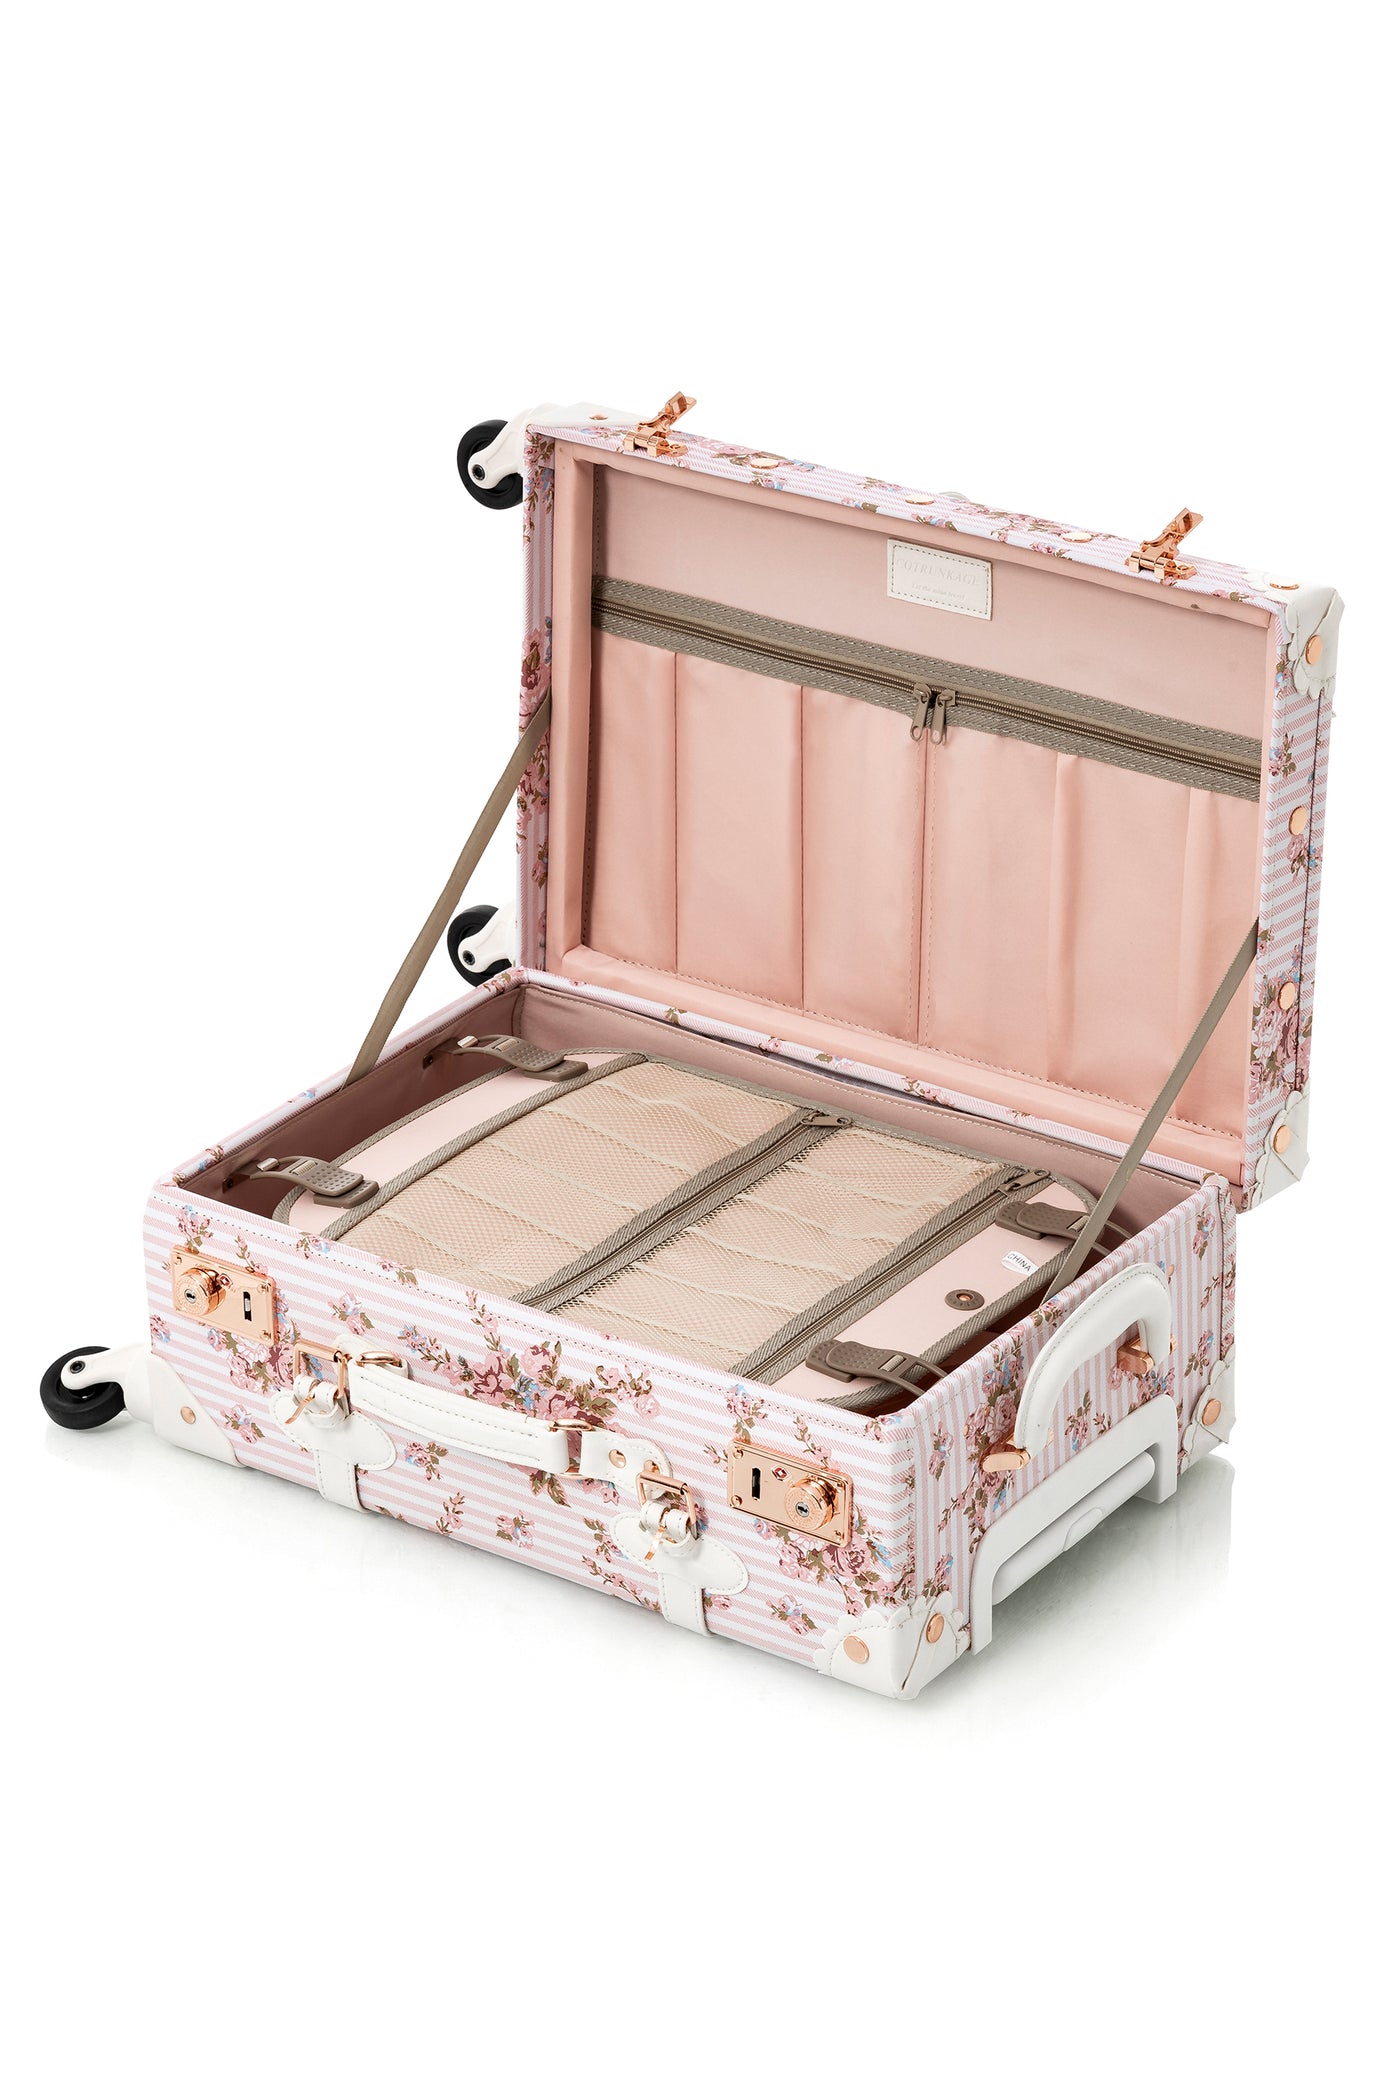 WildFloral 3 Pieces Luggage Set - Pink Floral's